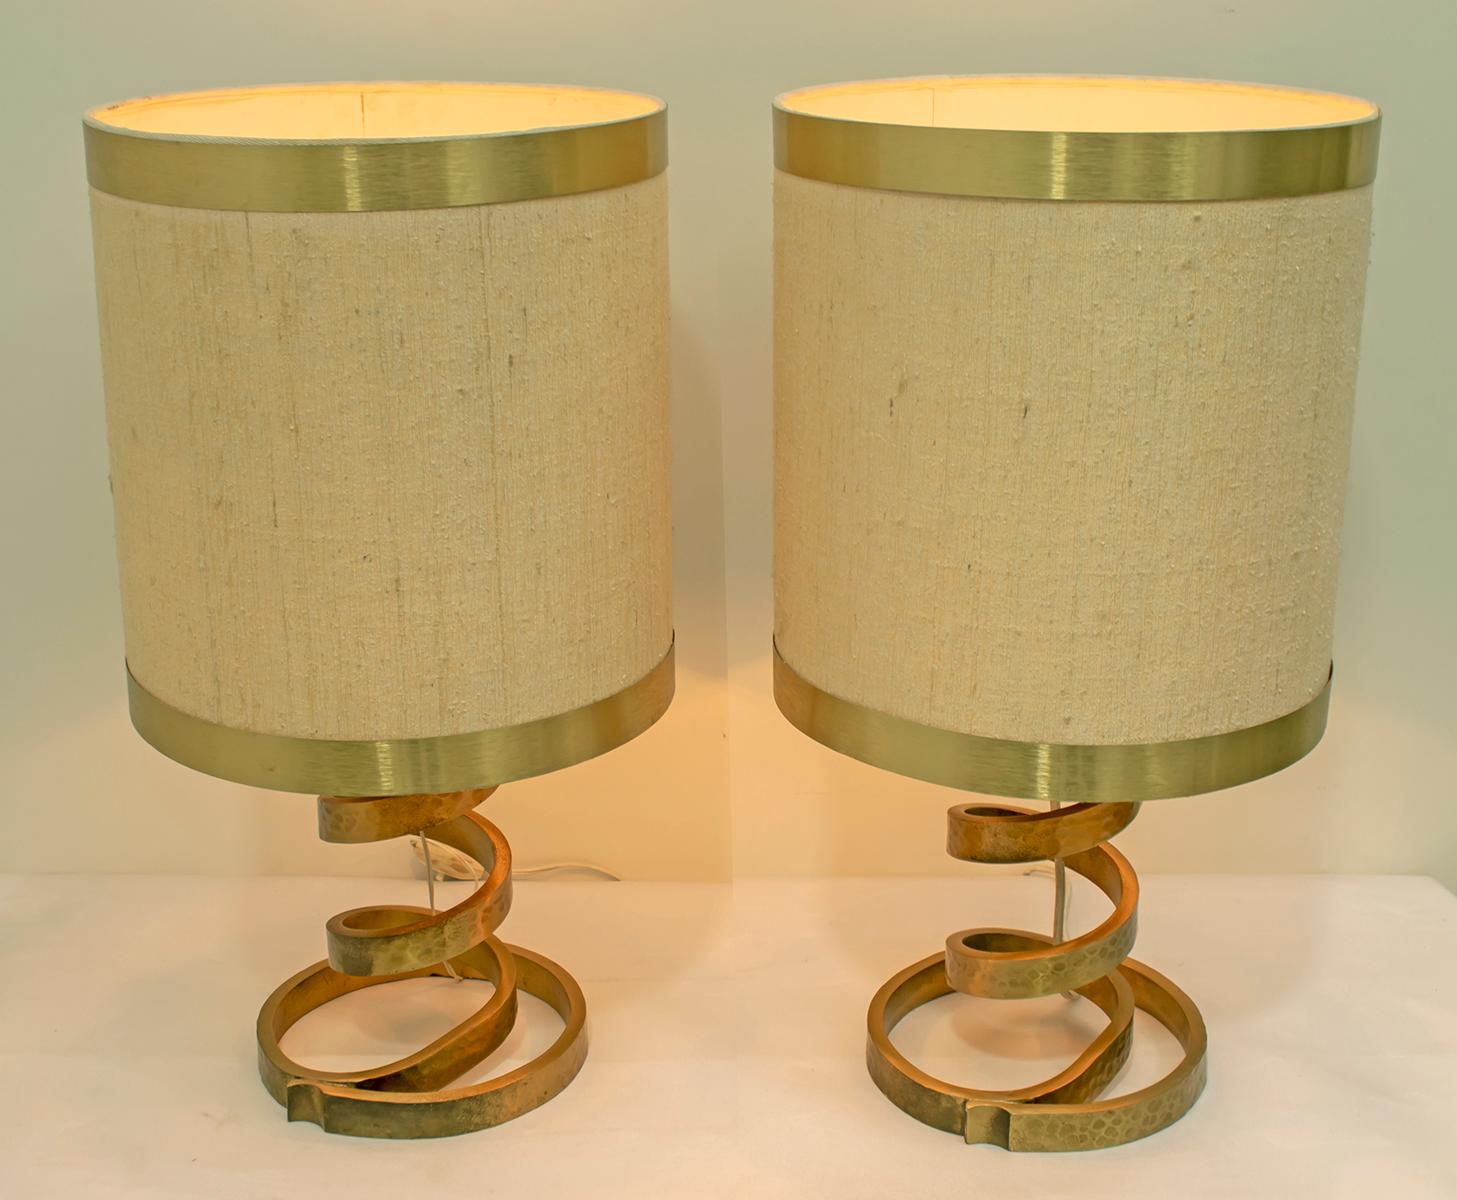 This pair of table lamps were produced in a limited series, designed by Luciano Frigerio and produced by the homonymous company Frigerio Di Desio, Italy, 1974.
Handmade in hammered brass in the shape of a spiral.
The lampshades are original,